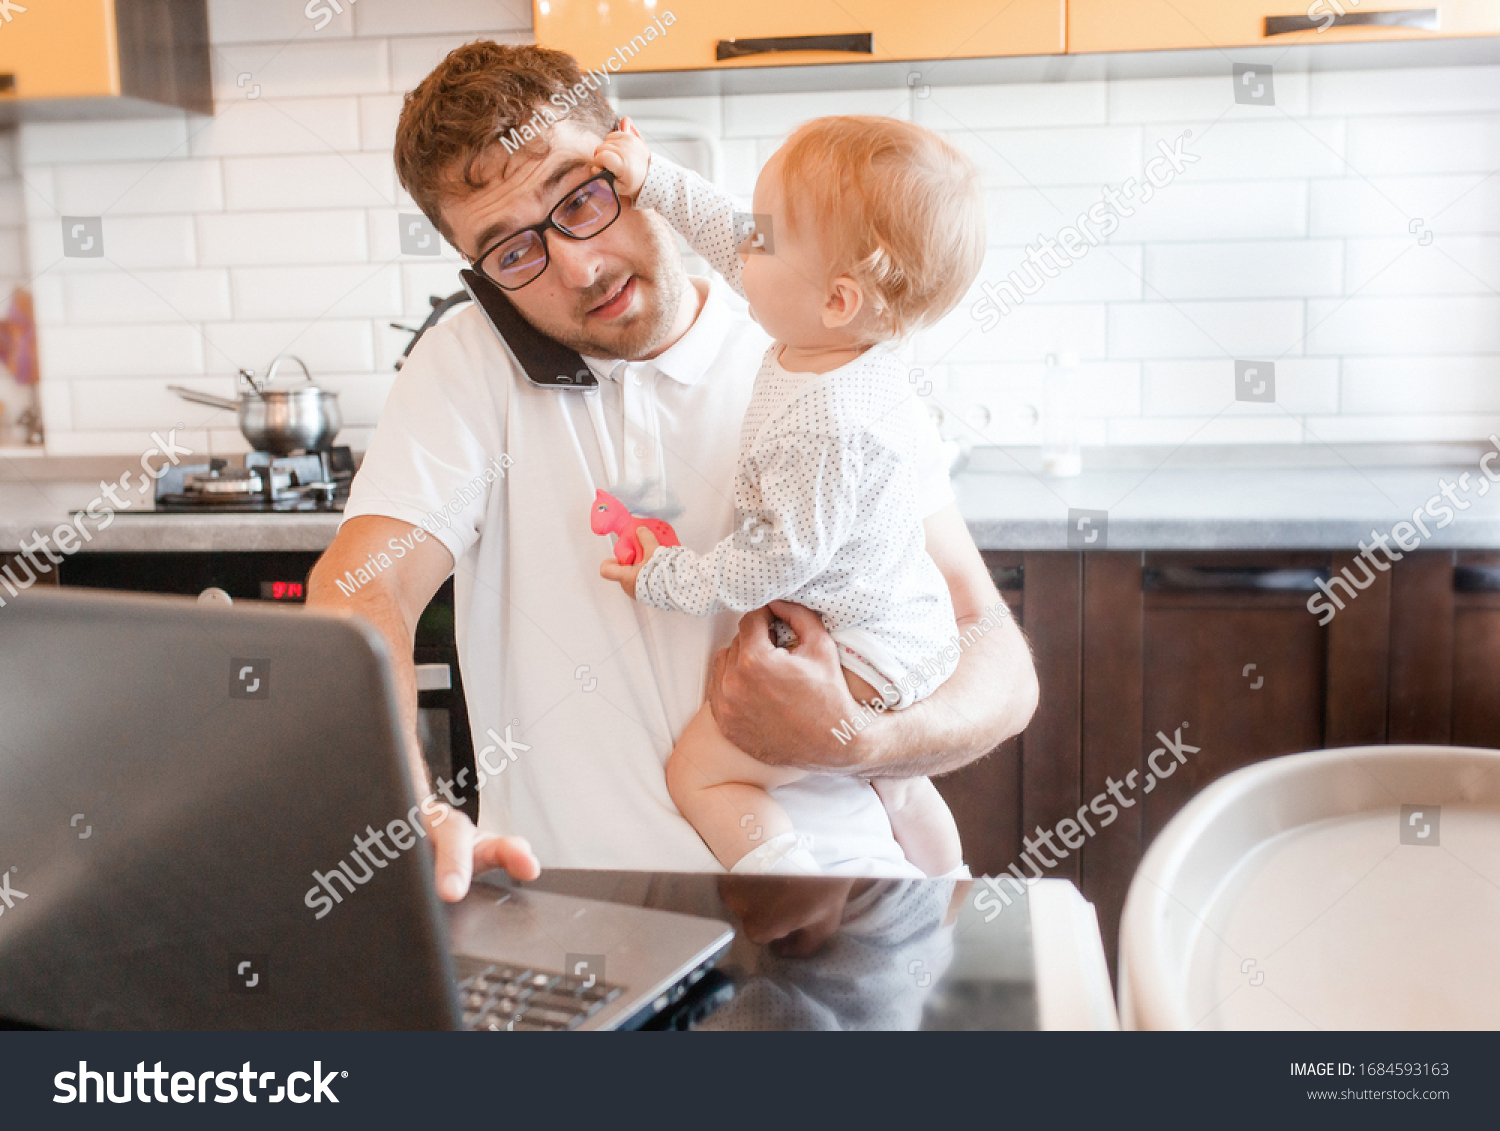 Handsome young man working at home with a laptop with a baby on his hands. Stay home concept. Home office with kids.  #1684593163